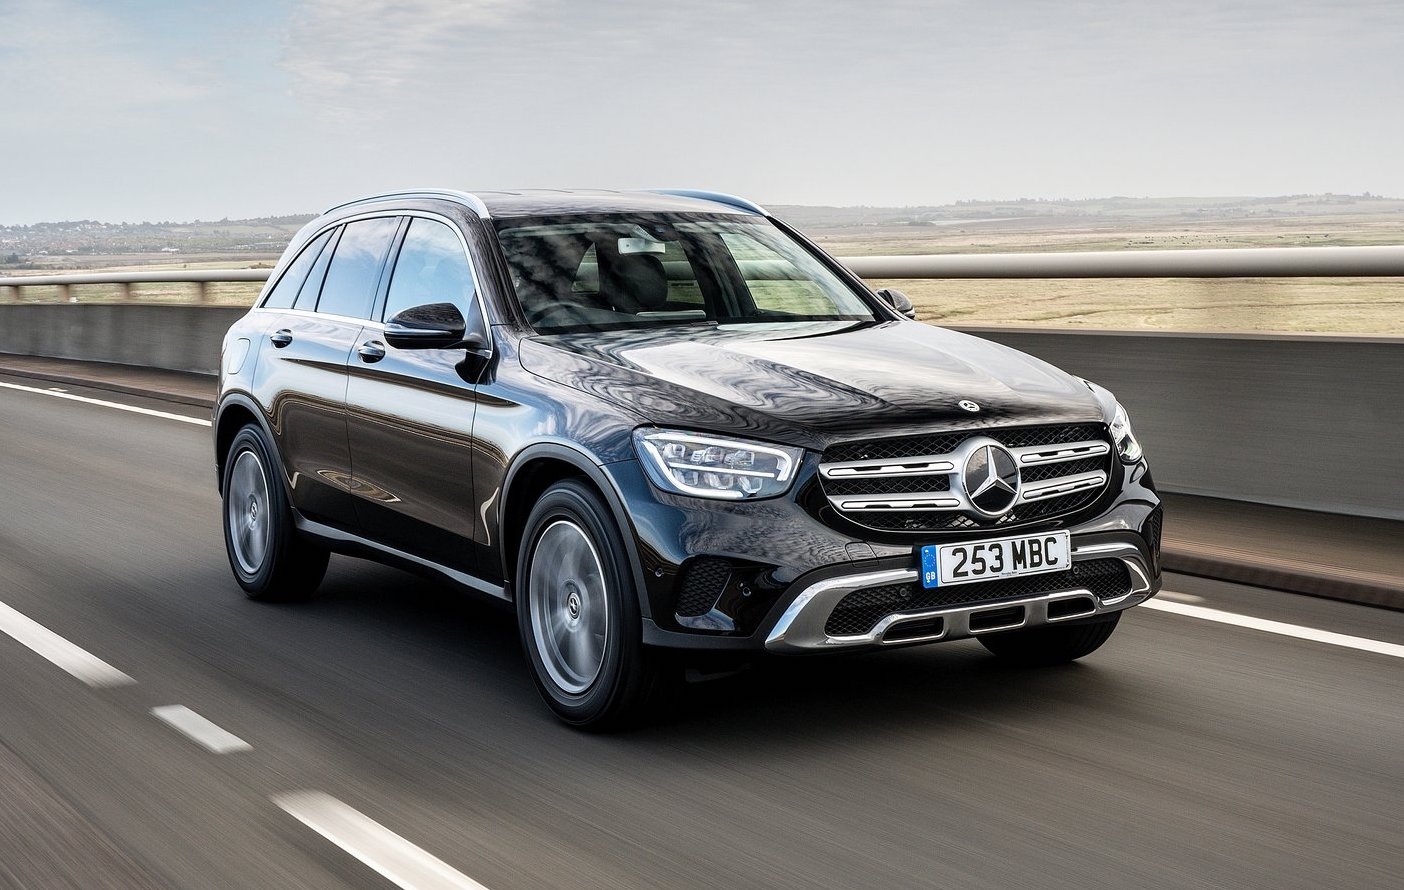 Mercedes-Benz global sales up 3.0% year-to-date through September